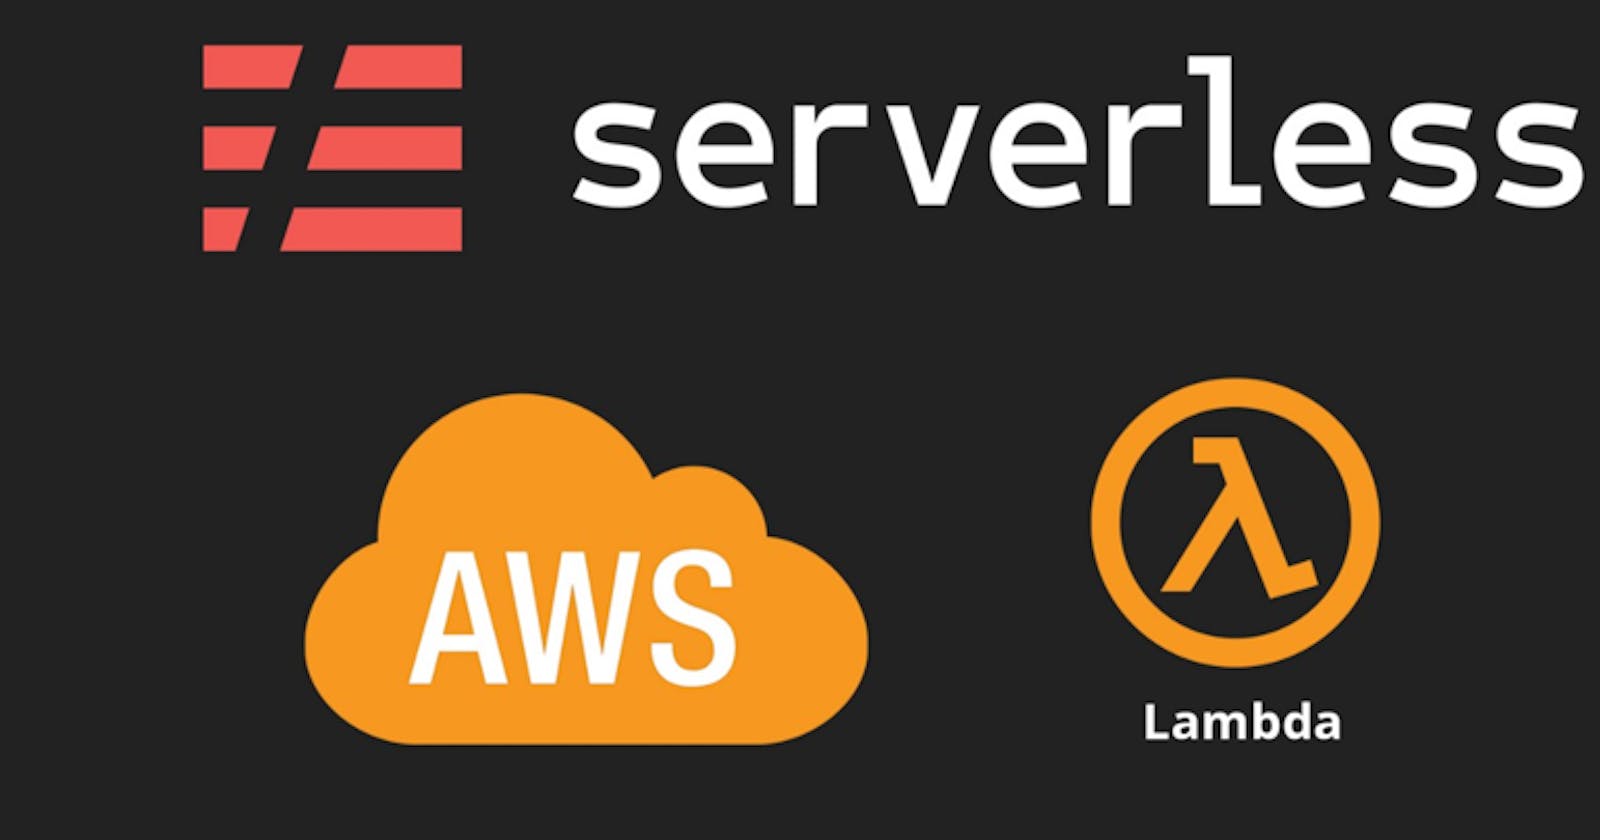 ServerlessArchitecture#04 AWS Lambda Cold Starts#PART-1 When it Occurs and Strategies to Optimize